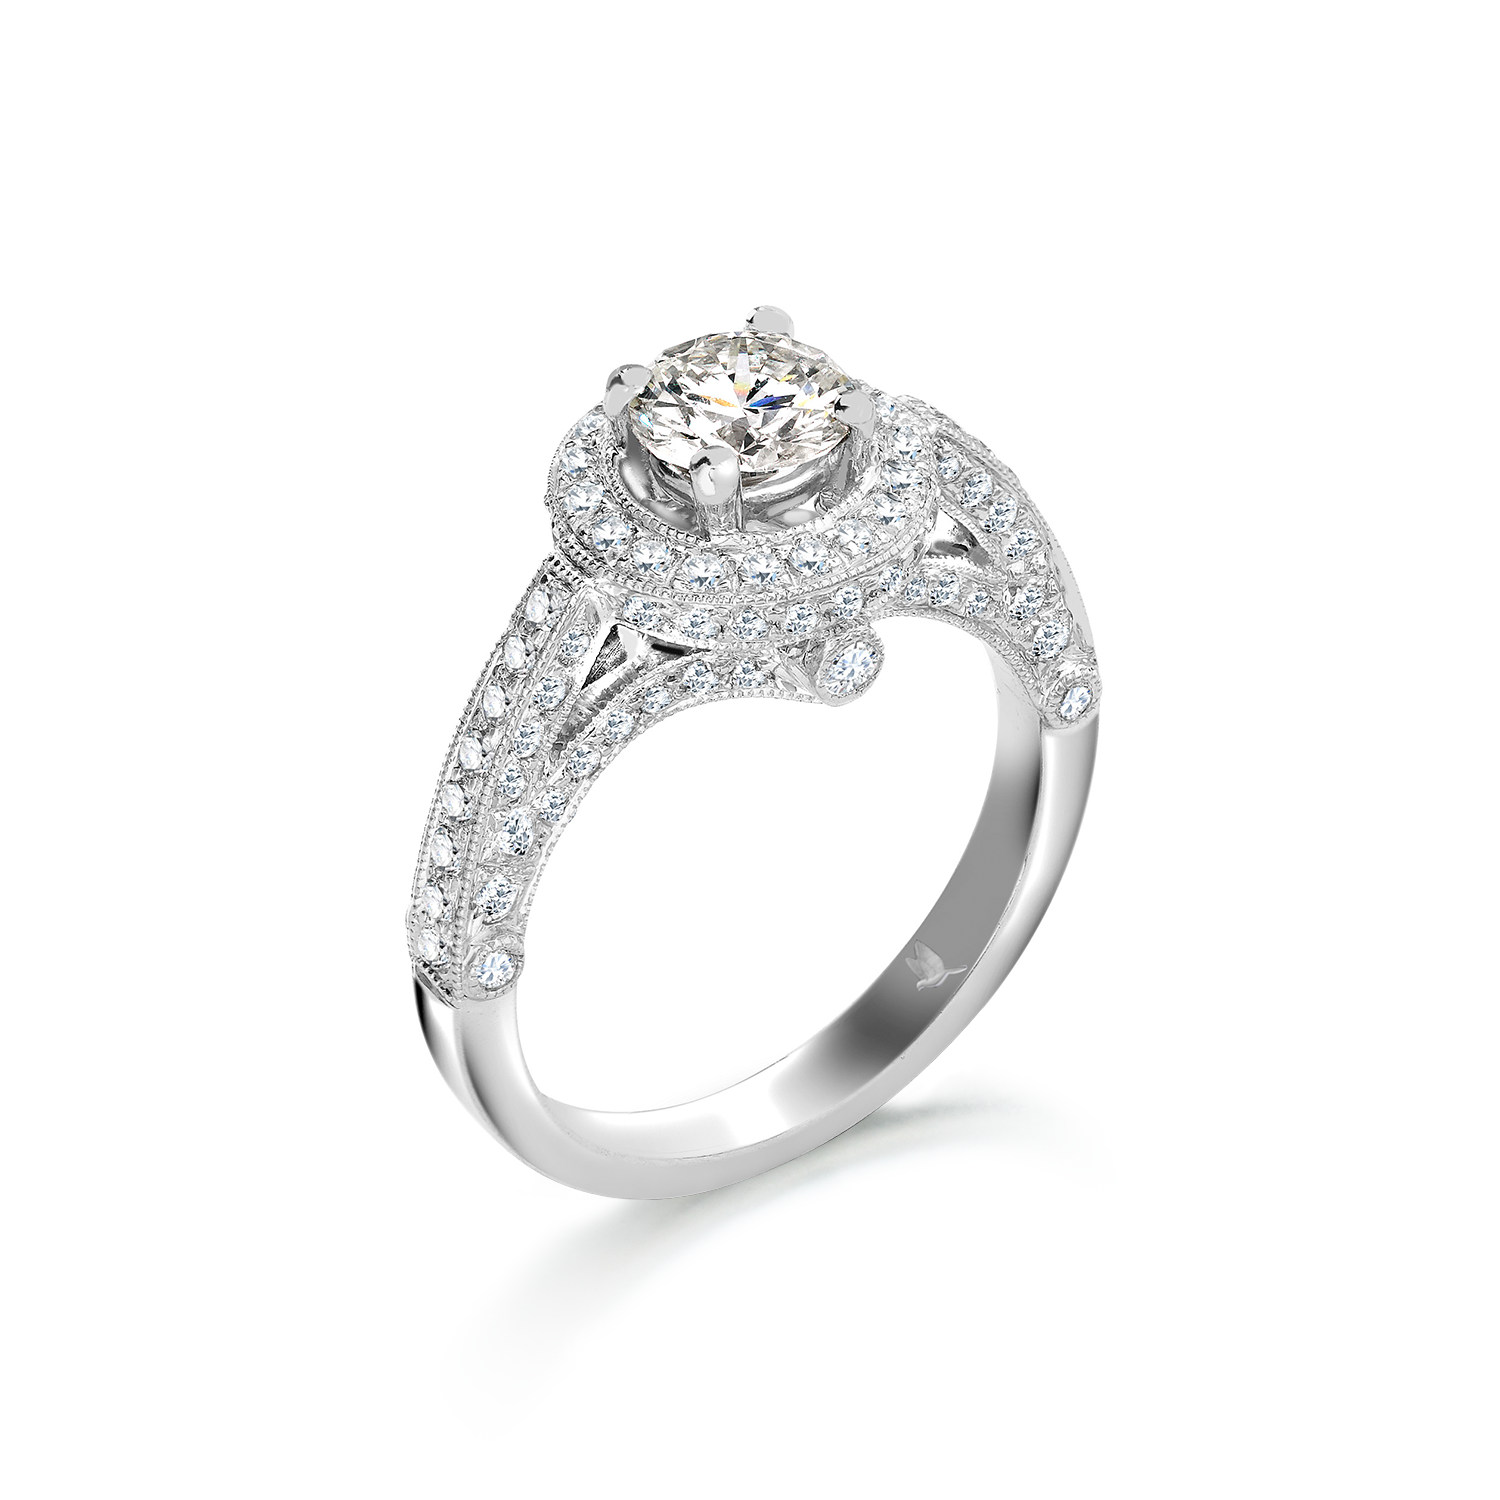 Intricate brilliant cut diamond ring with halo set to two sides